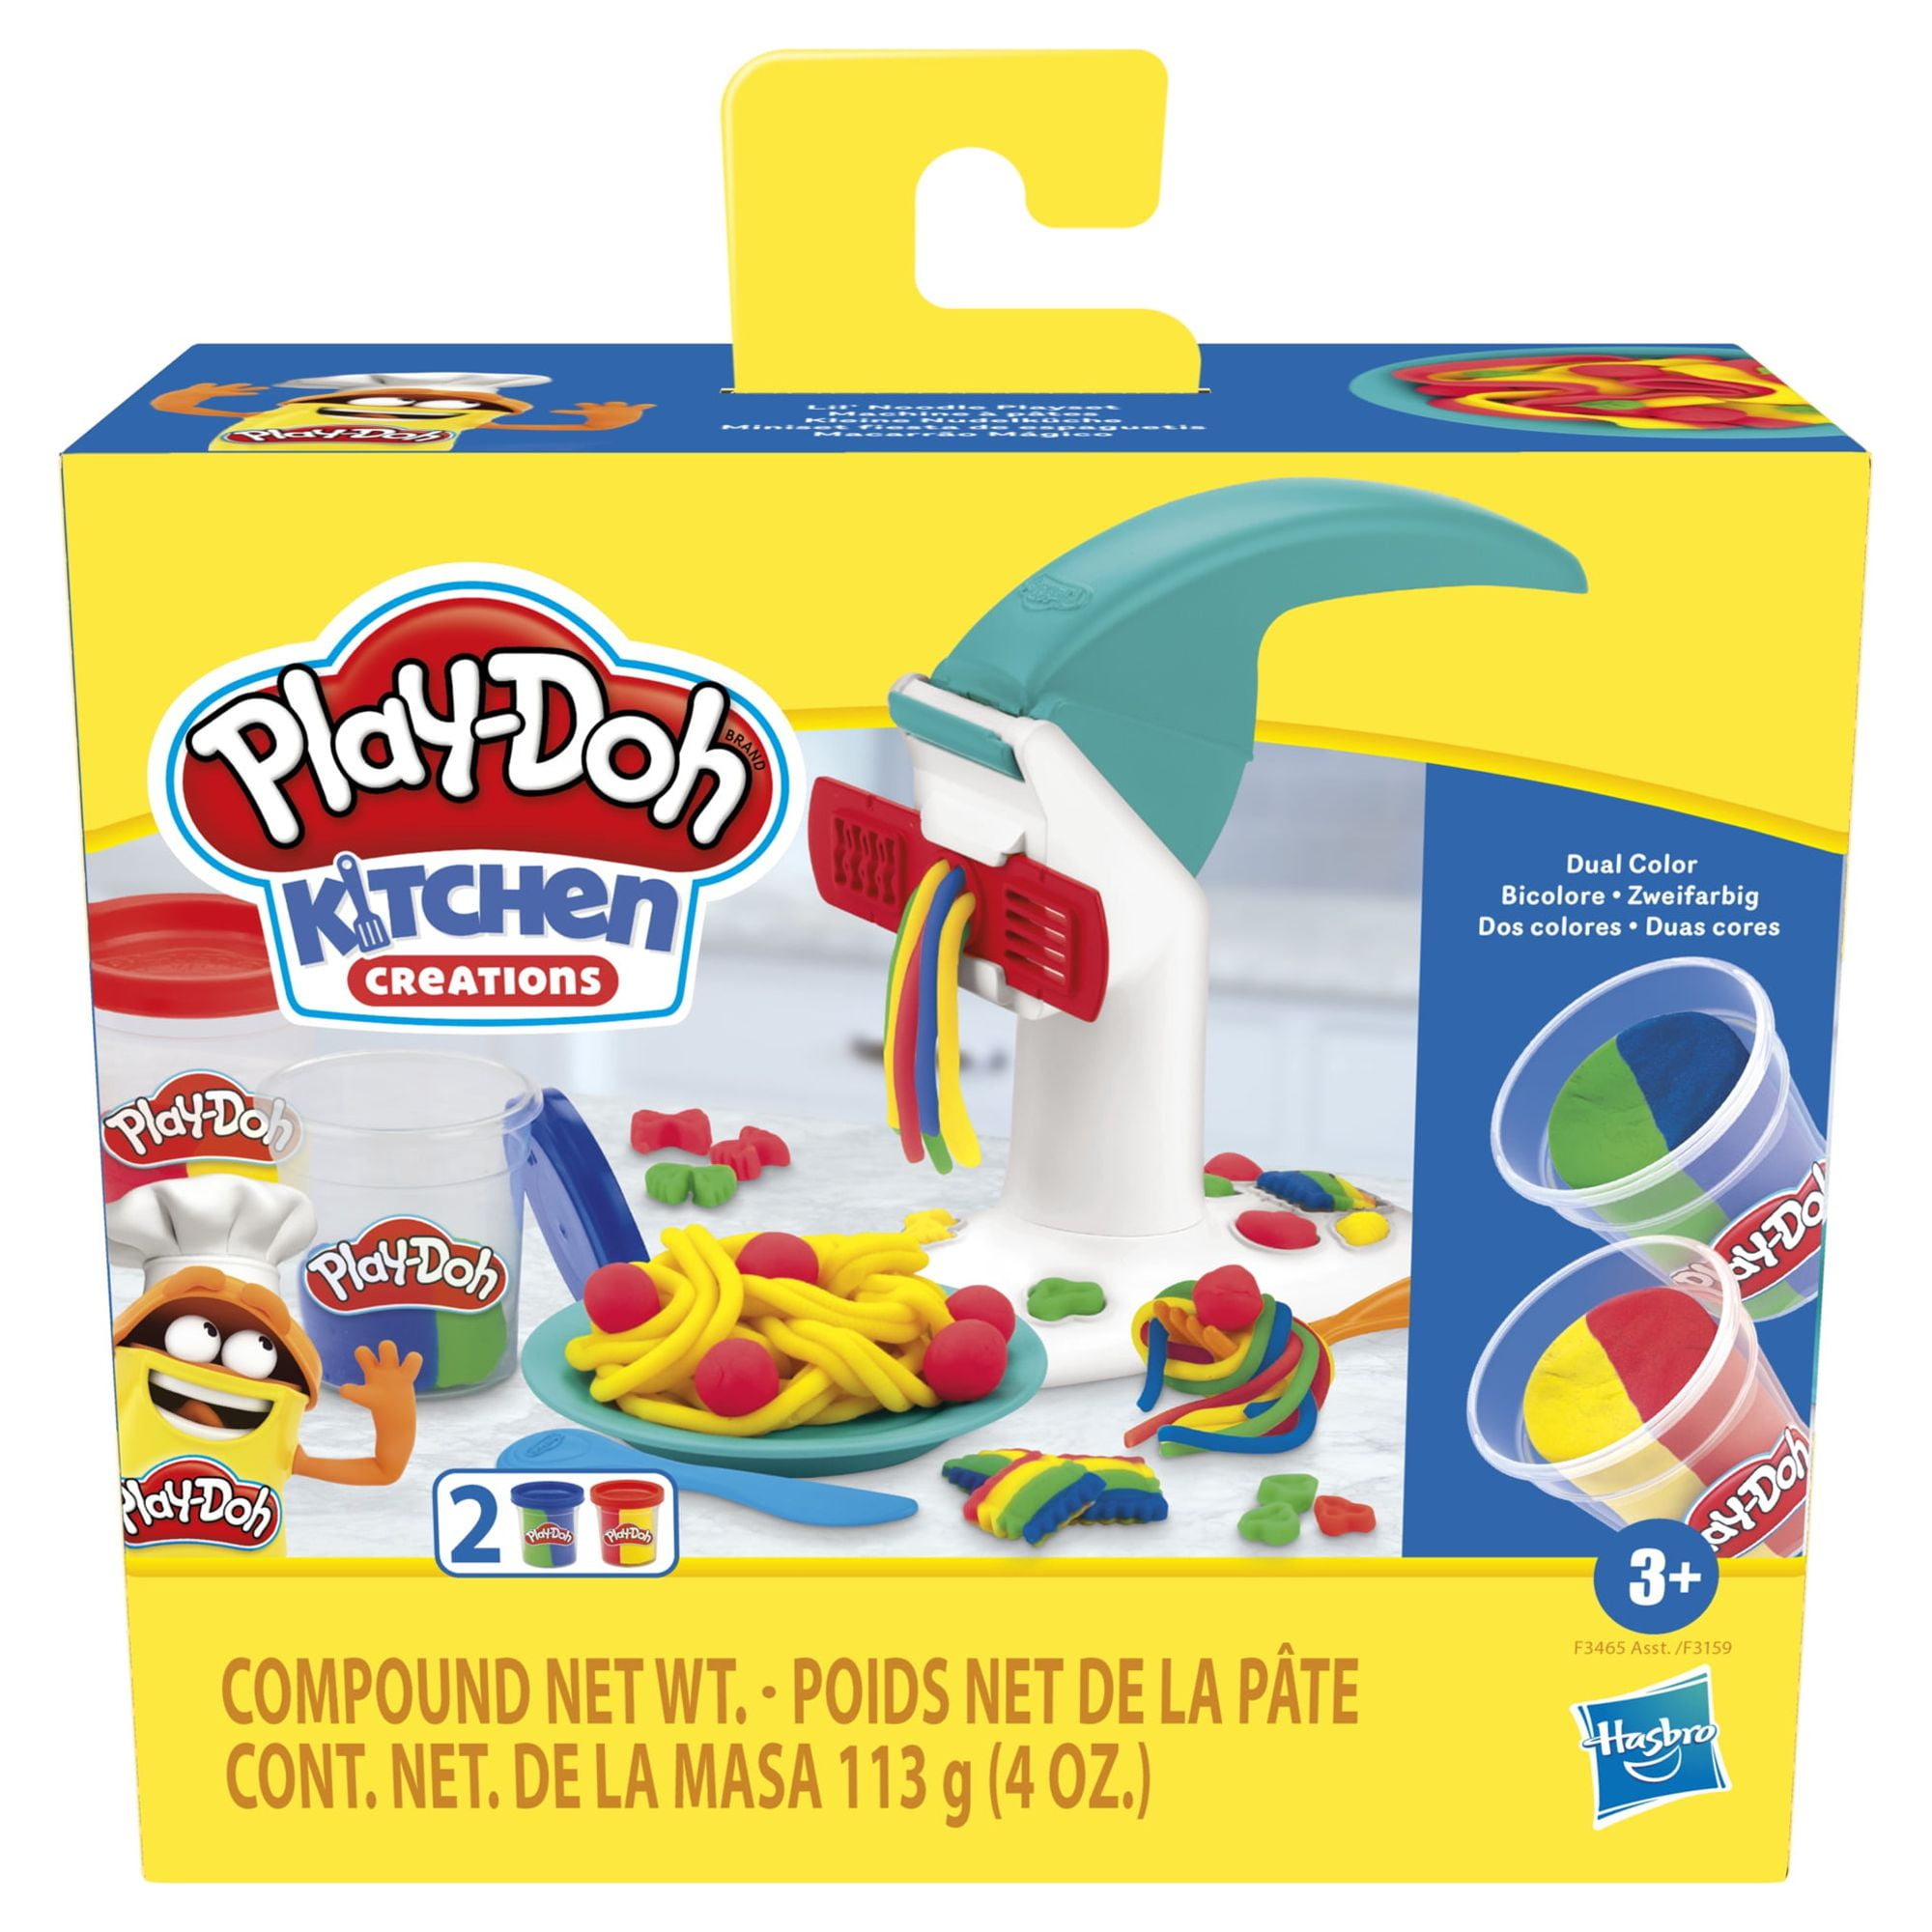 Play-Doh Kitchen Creations Lil’ Noodle Play Dough Set - 4 Color (2 Piece), Only At Walmart $17.00